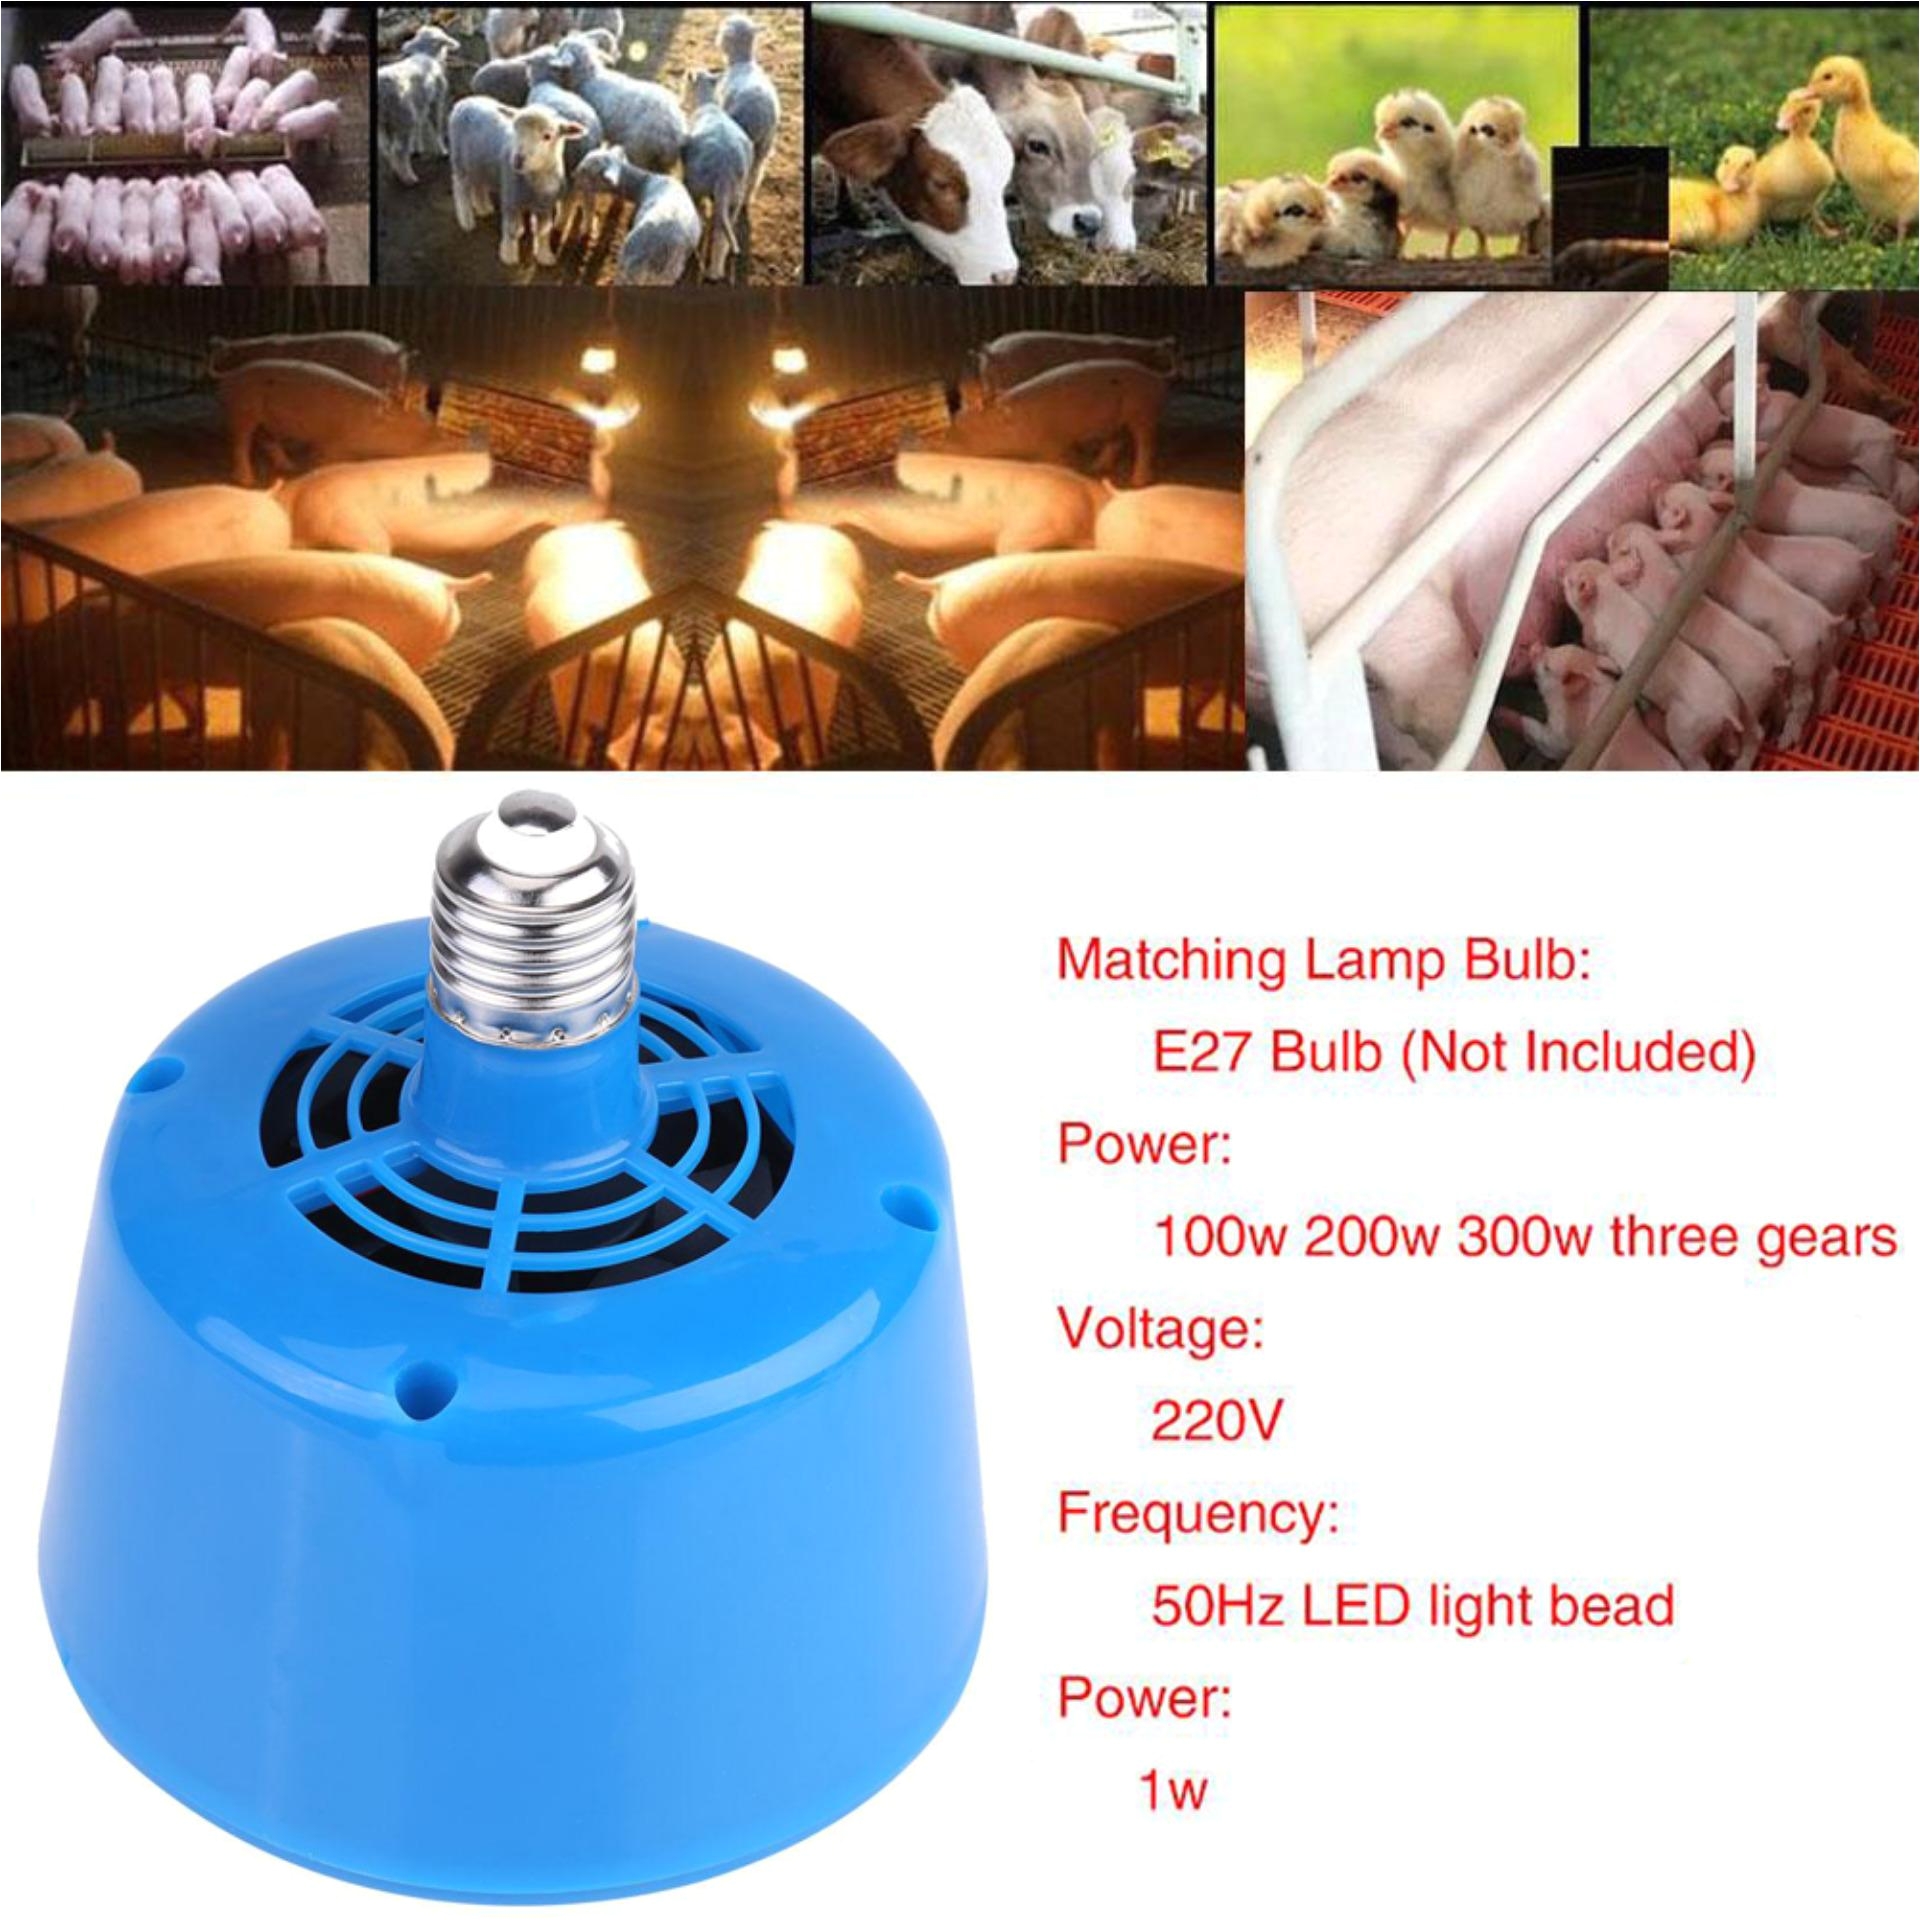 cultivation heating lamp thermostat for piglets chicken animal breeding intl